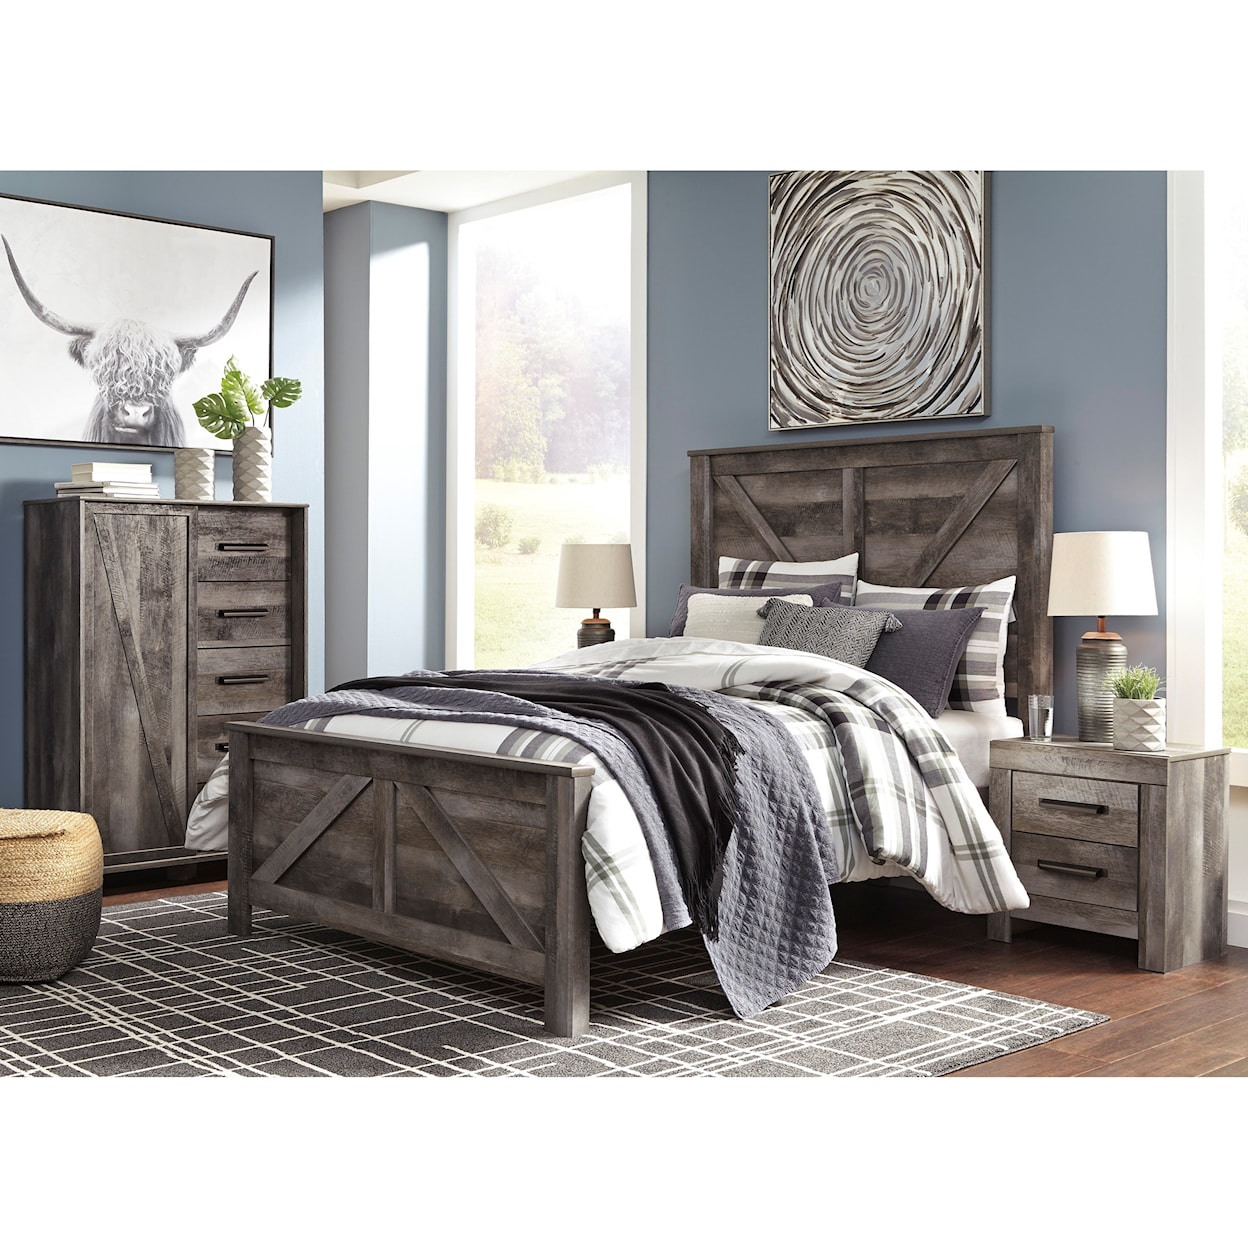 Ashley Signature Design Wynnlow Queen Bedroom Group